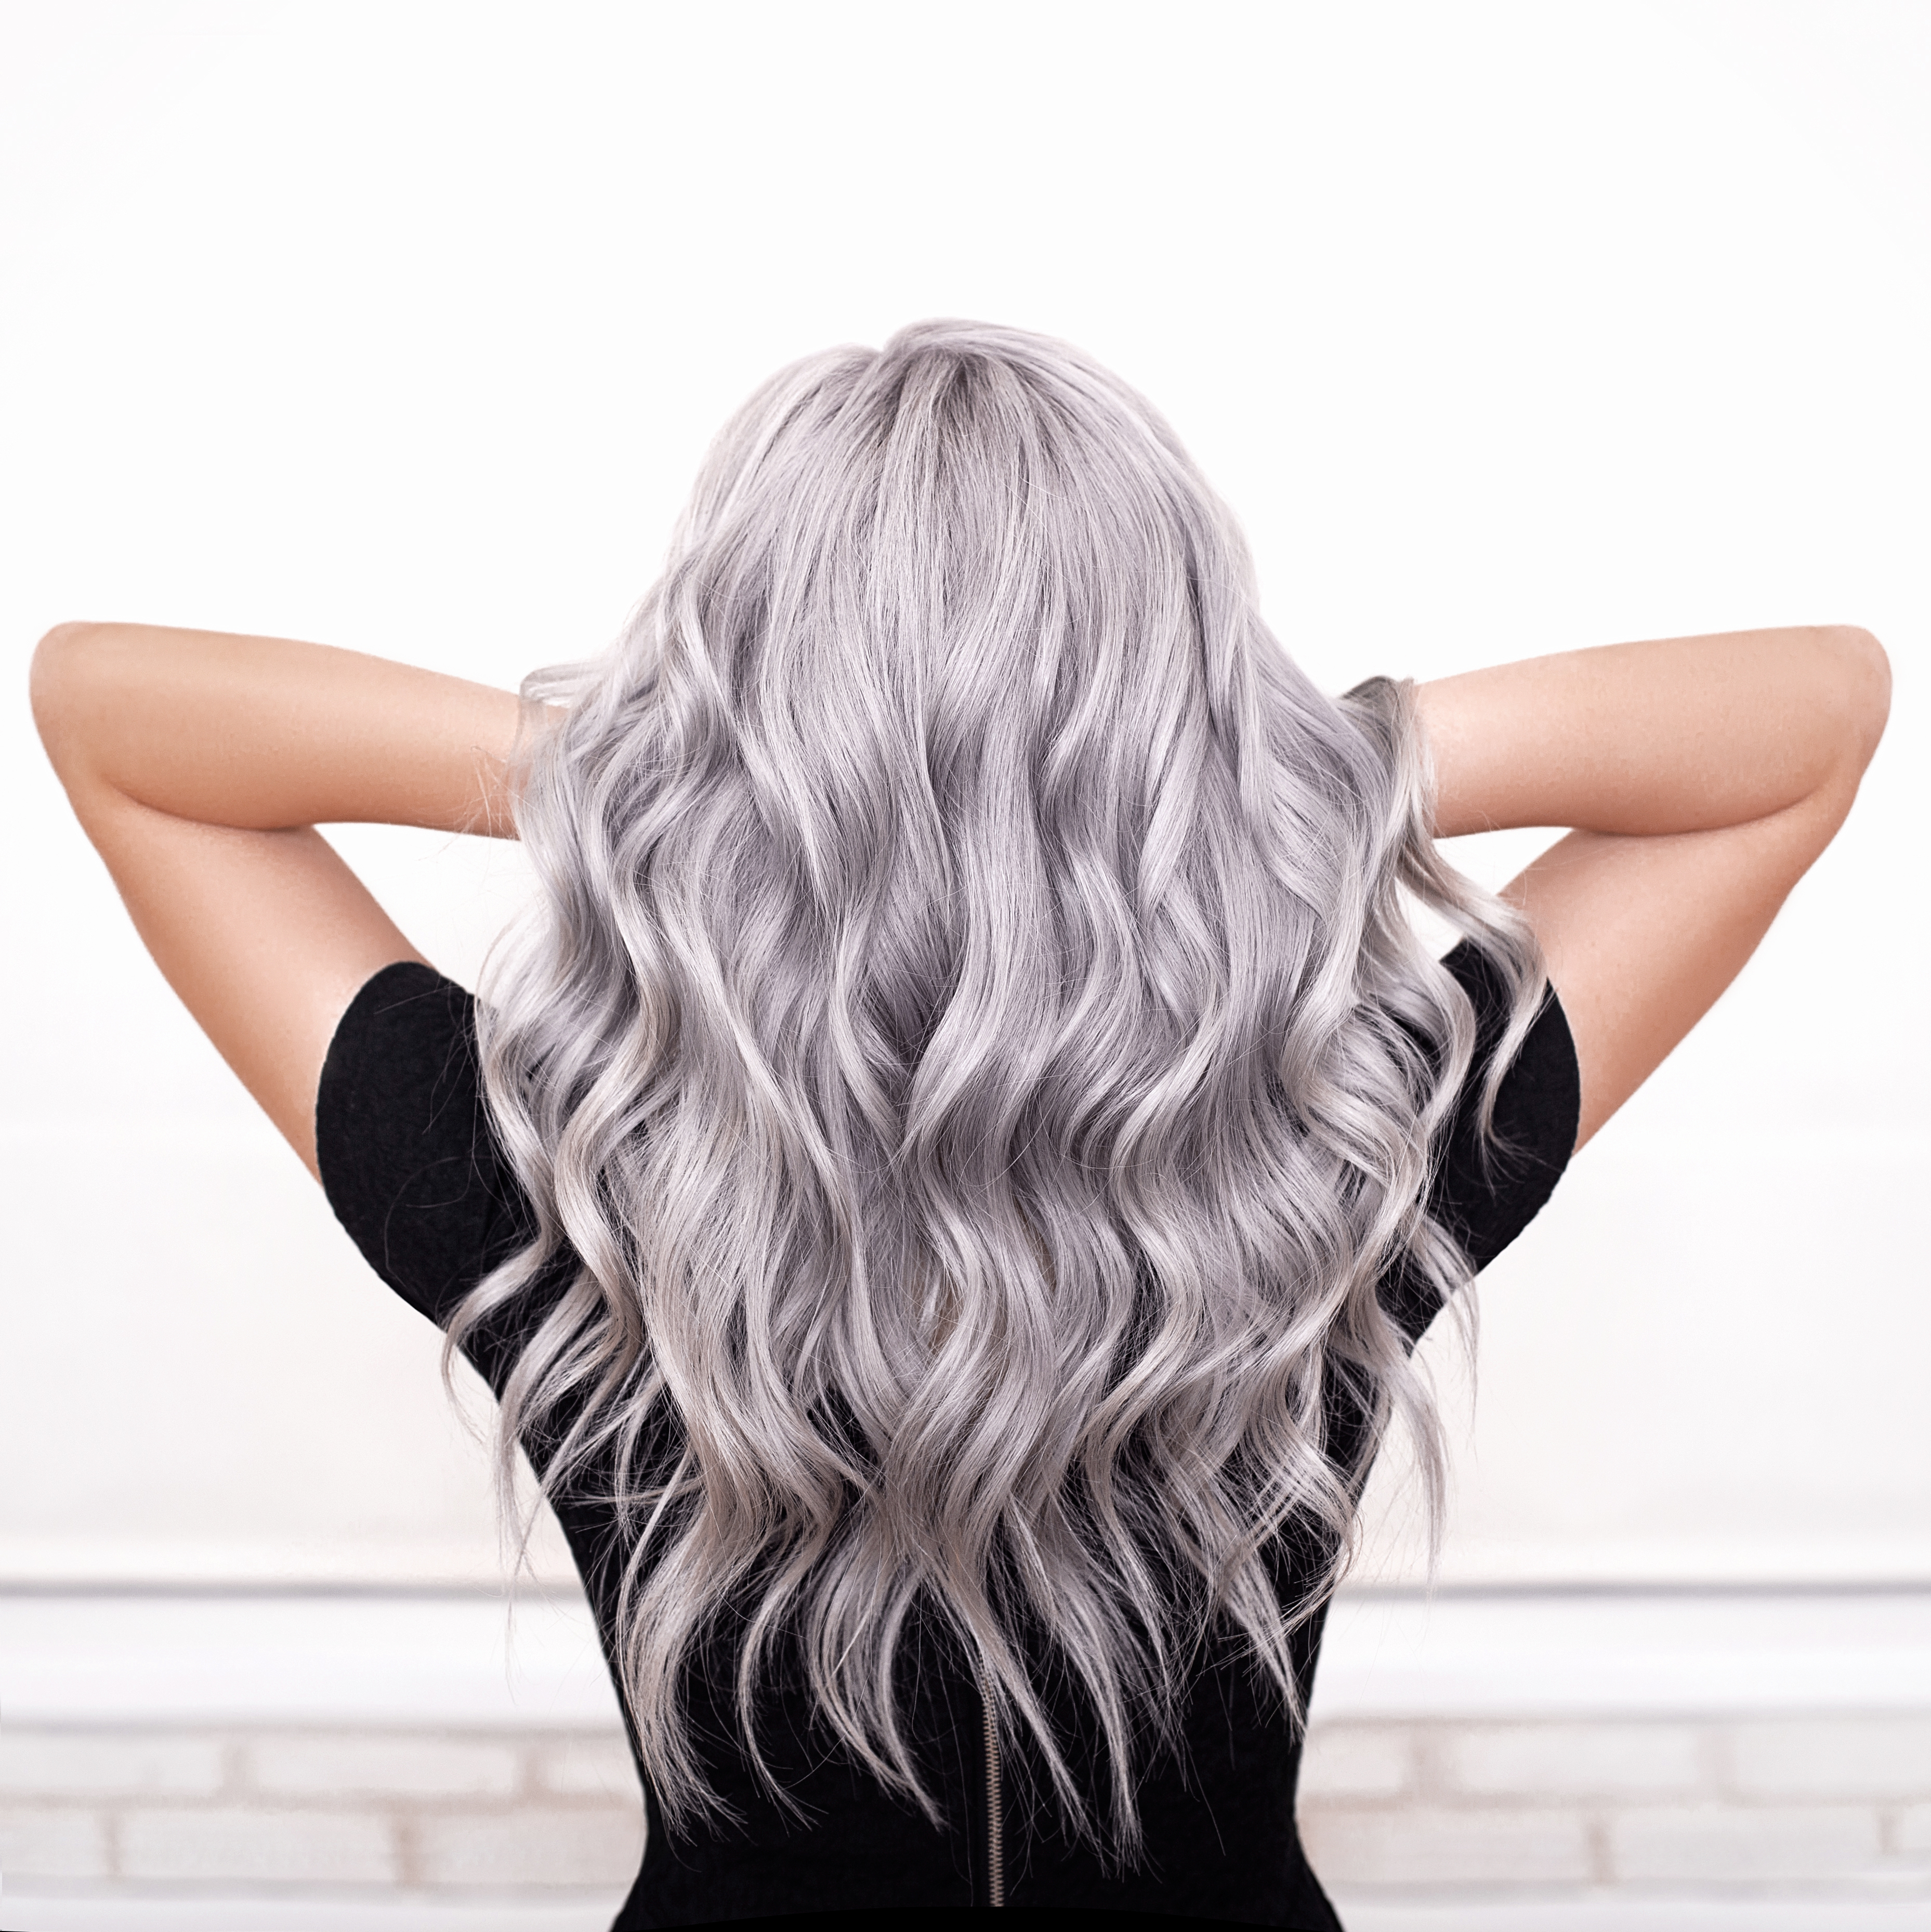 Silver-haired haired woman with her hair styled in curls | Source: Shutterstock